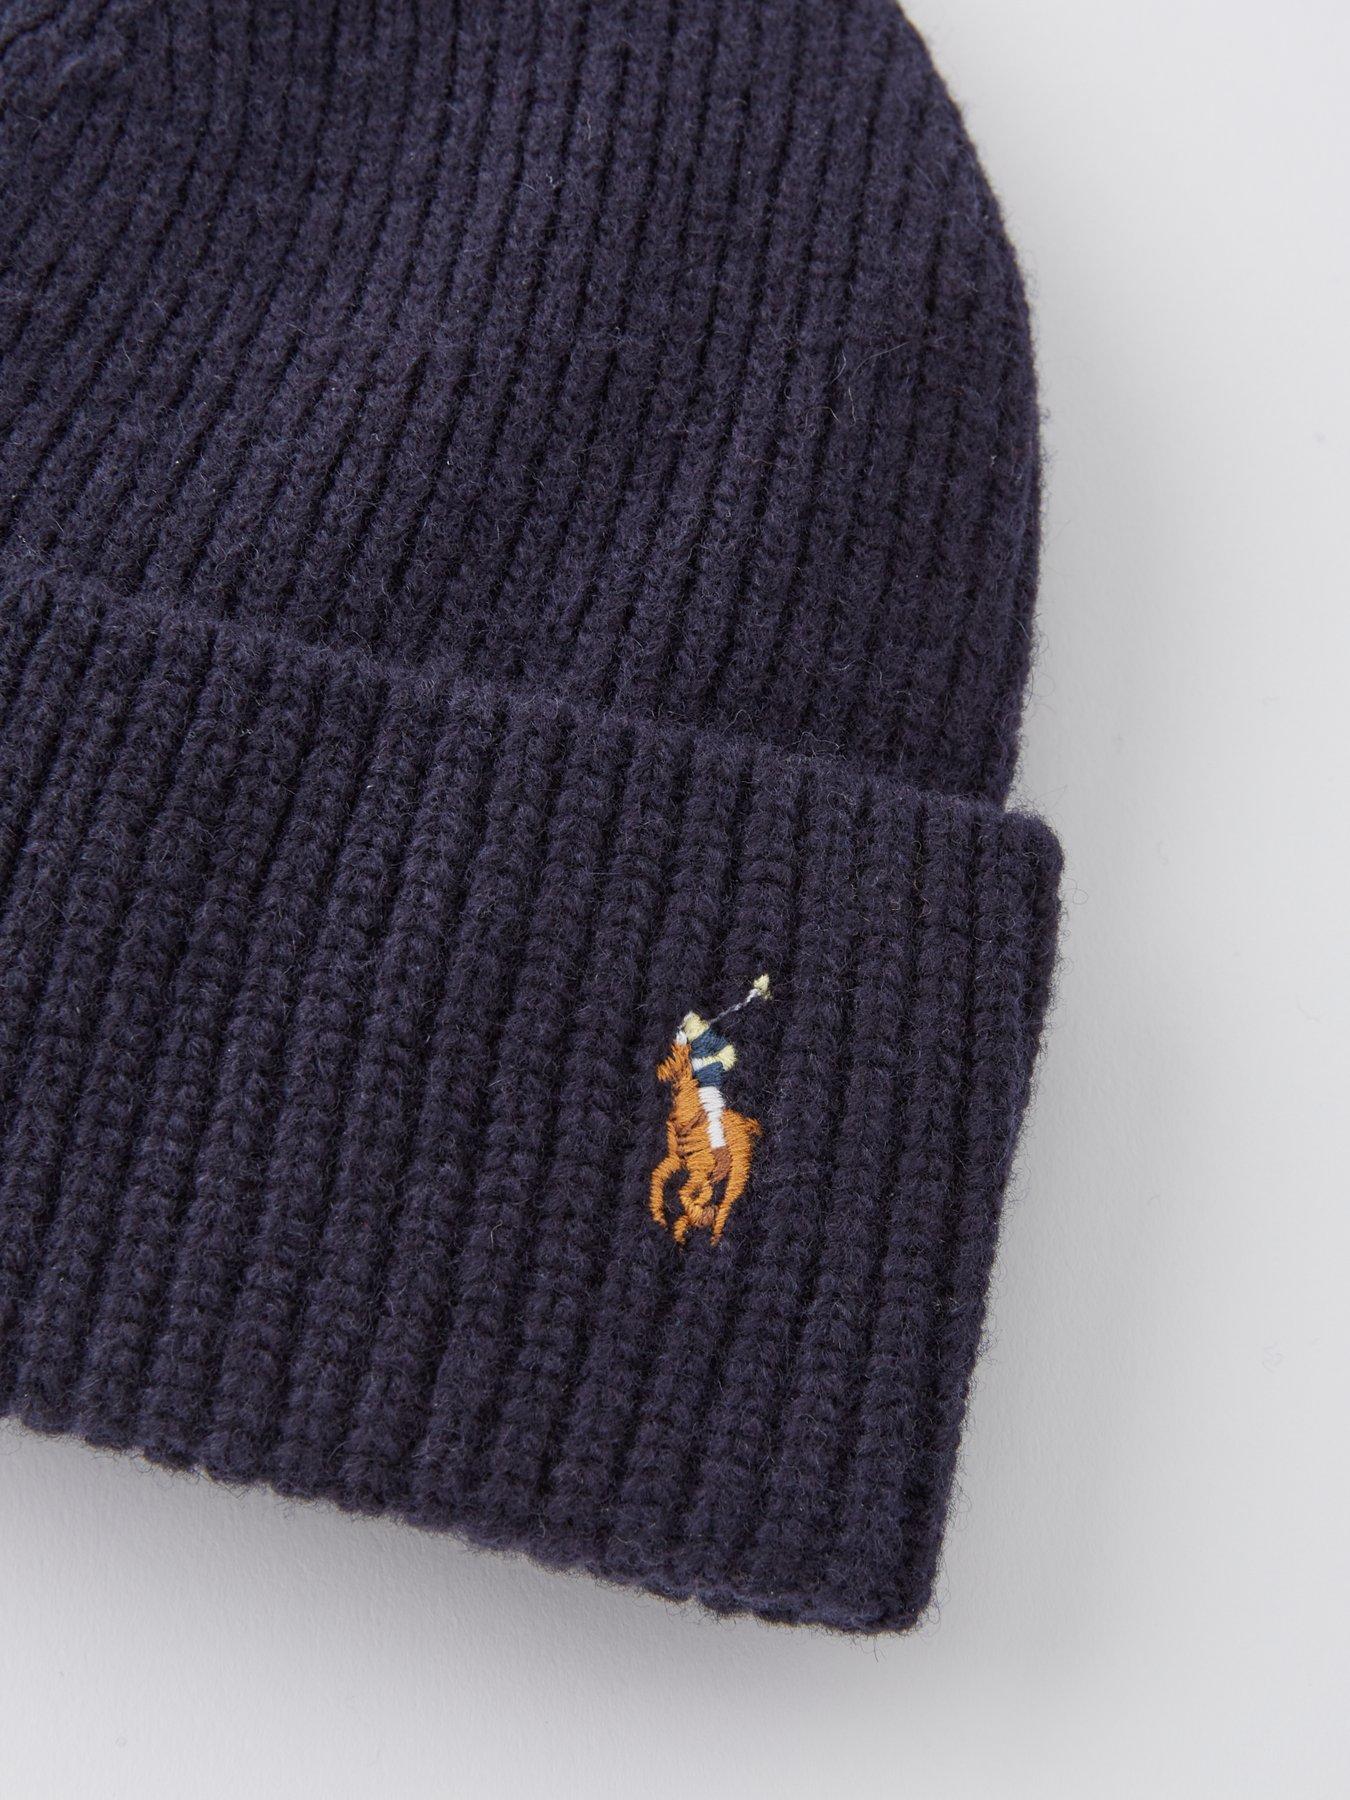 Polo Ralph Lauren Signature Rib Knitted Scarf & Knitted Beanie Hat Gift Set  